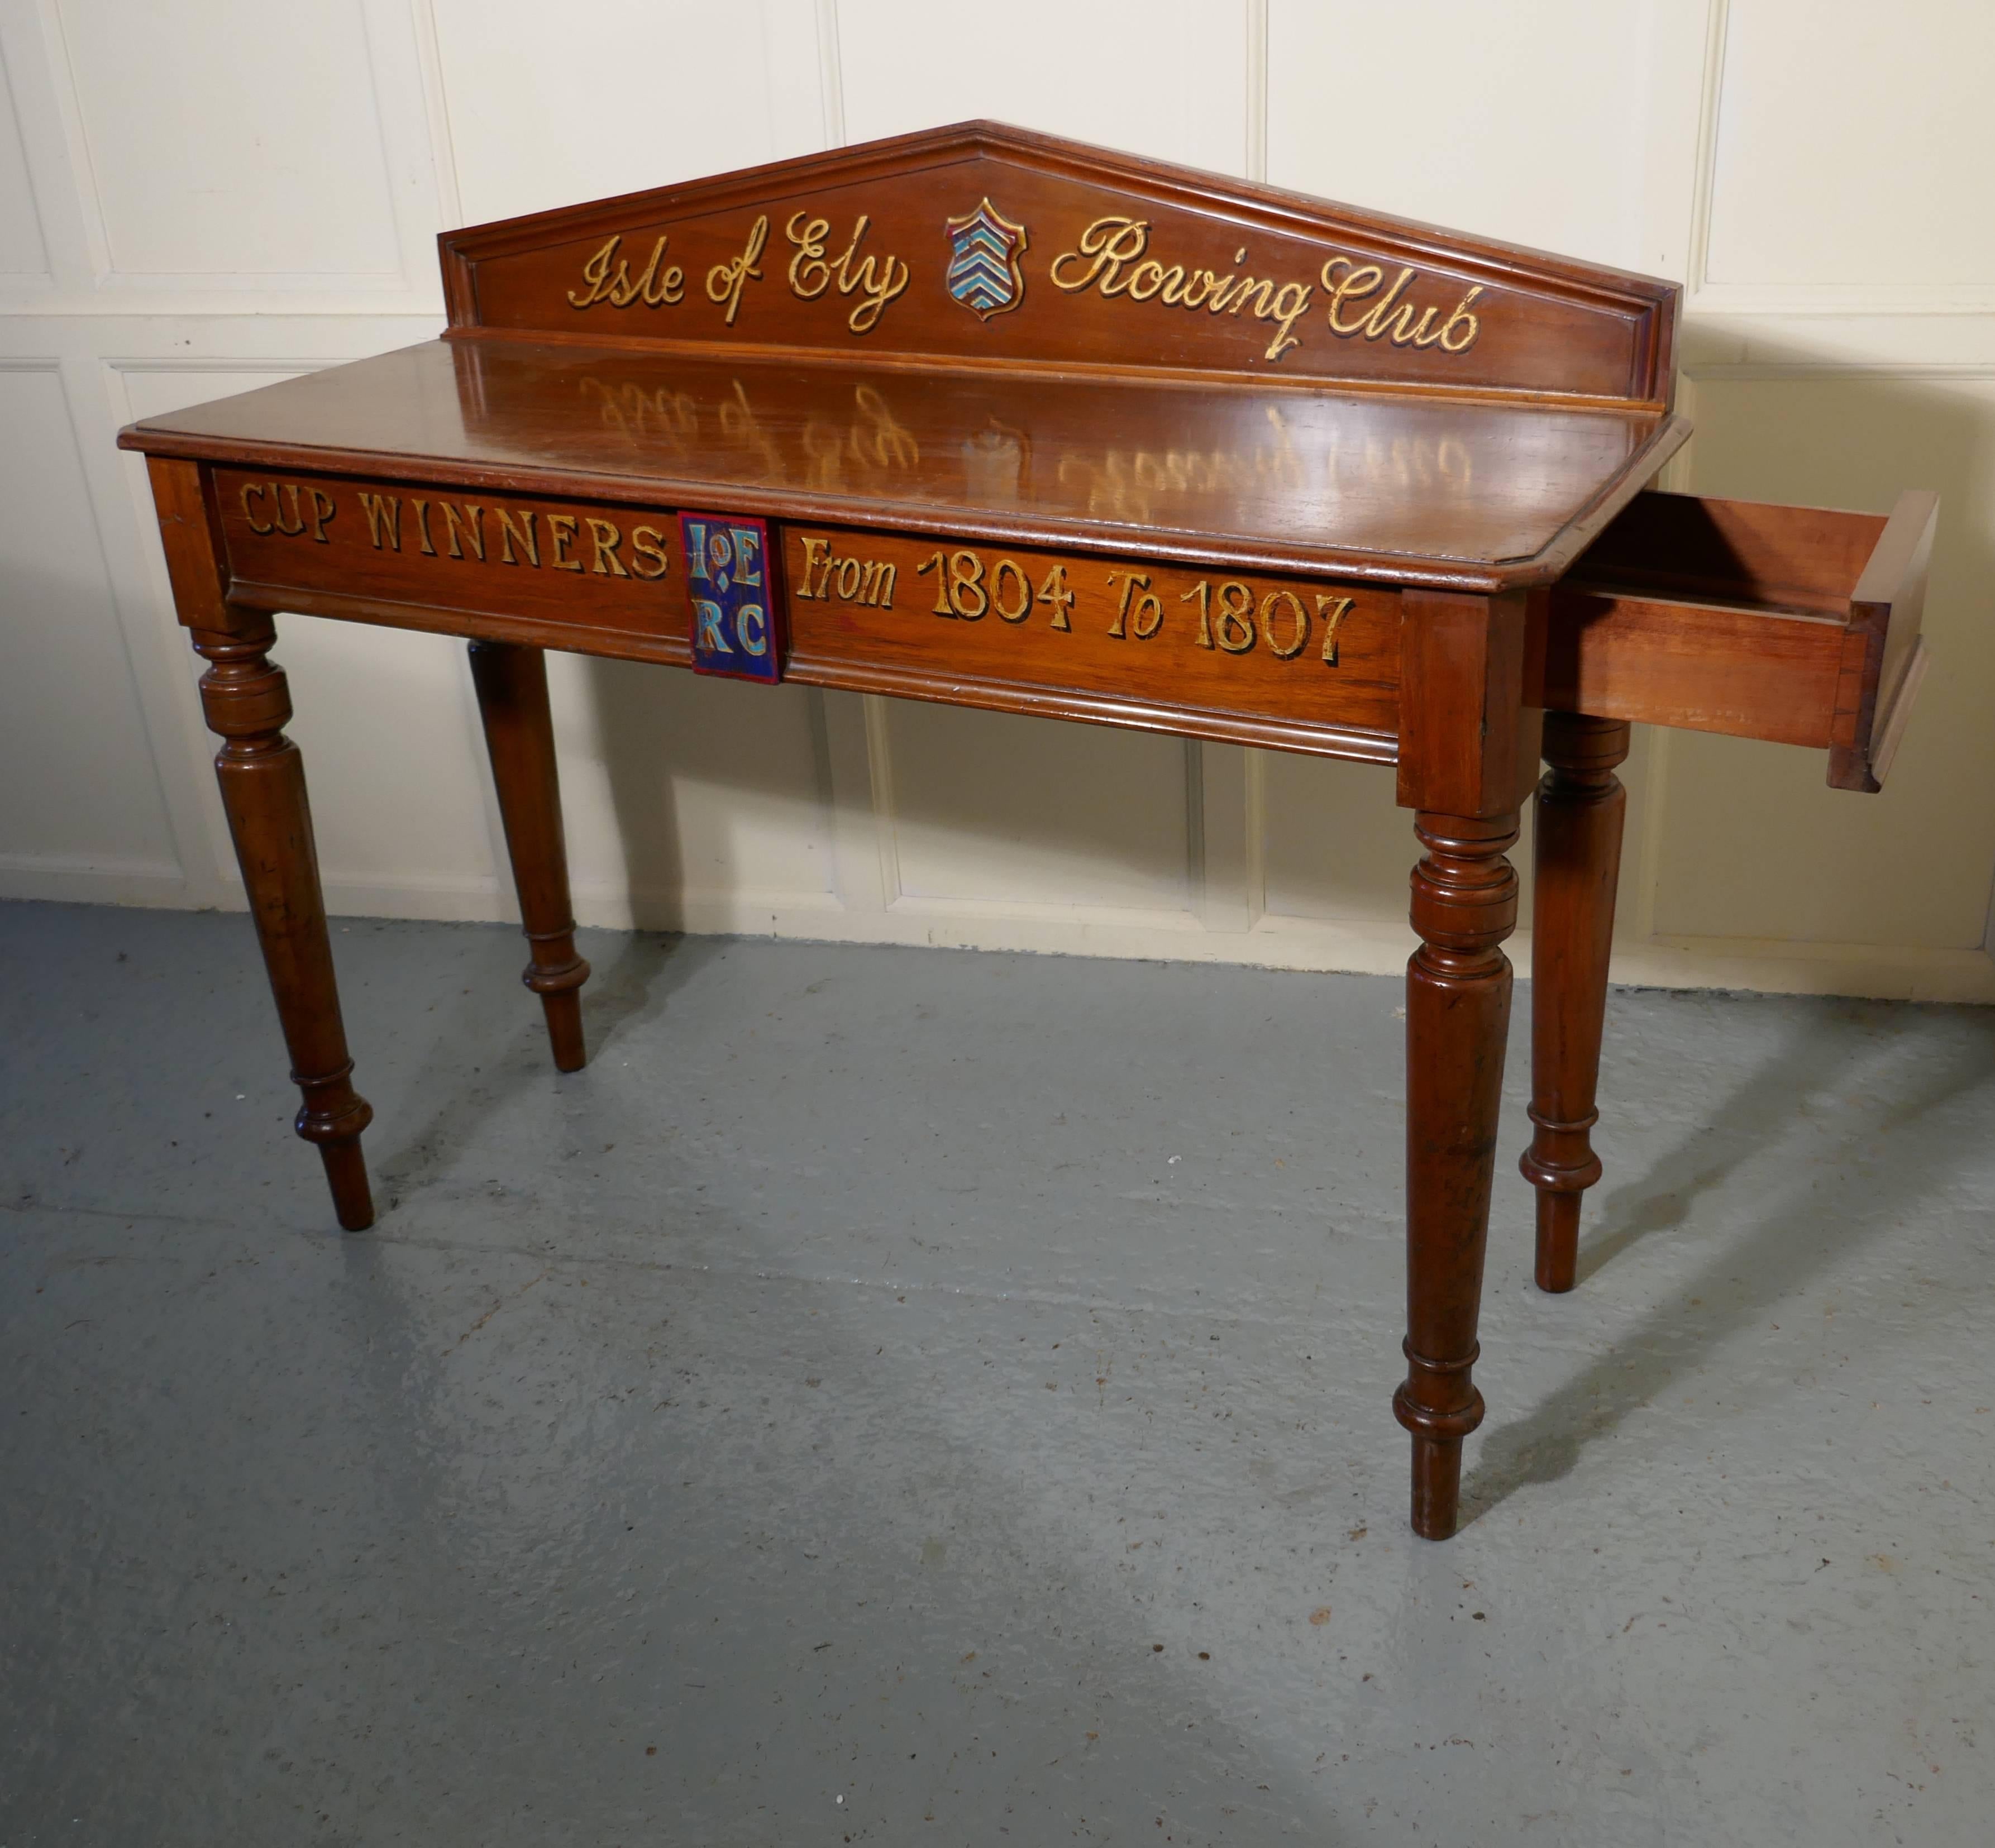 Great Britain (UK) Victorian Mahogany Side Table from “Theisle of Ely” Rowing Club